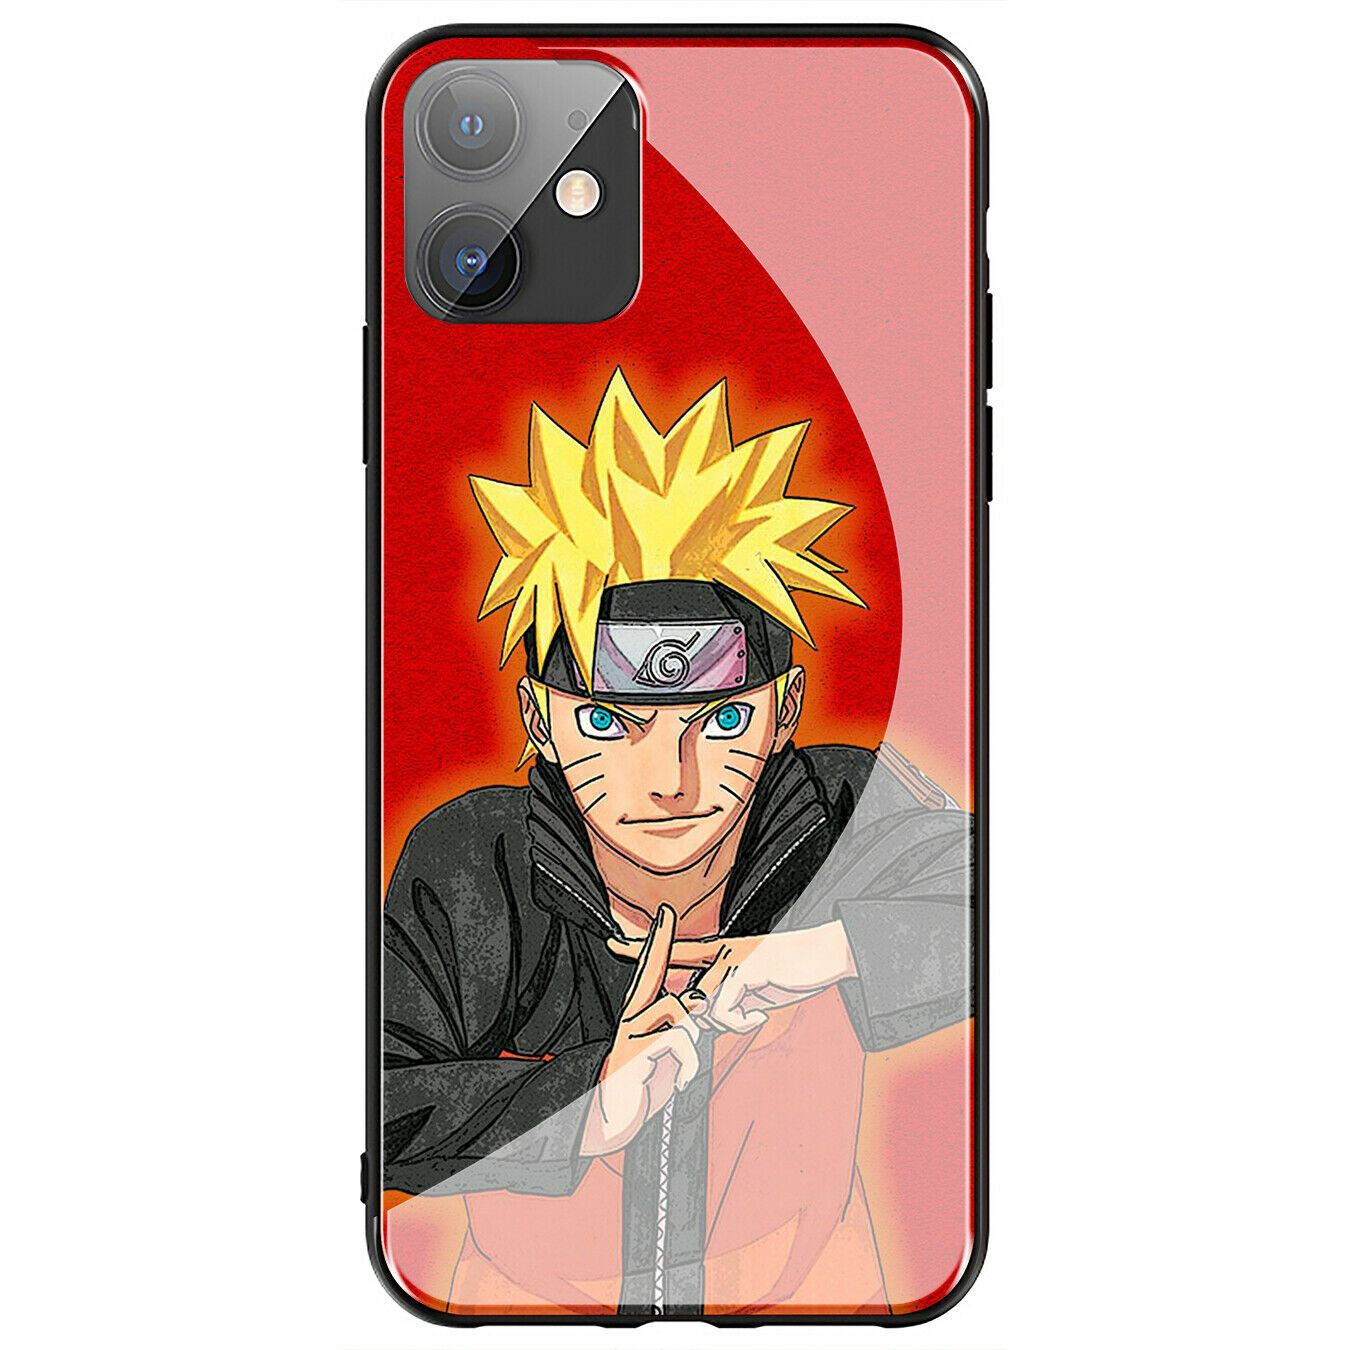 Sasuke NARUTO Akatsuki Glass Case for iPhone 11 Pro XR X XS Max 8 7 6 6s Plus + iPhone Cases AtlasCase 11 for iPhone 6/6S 